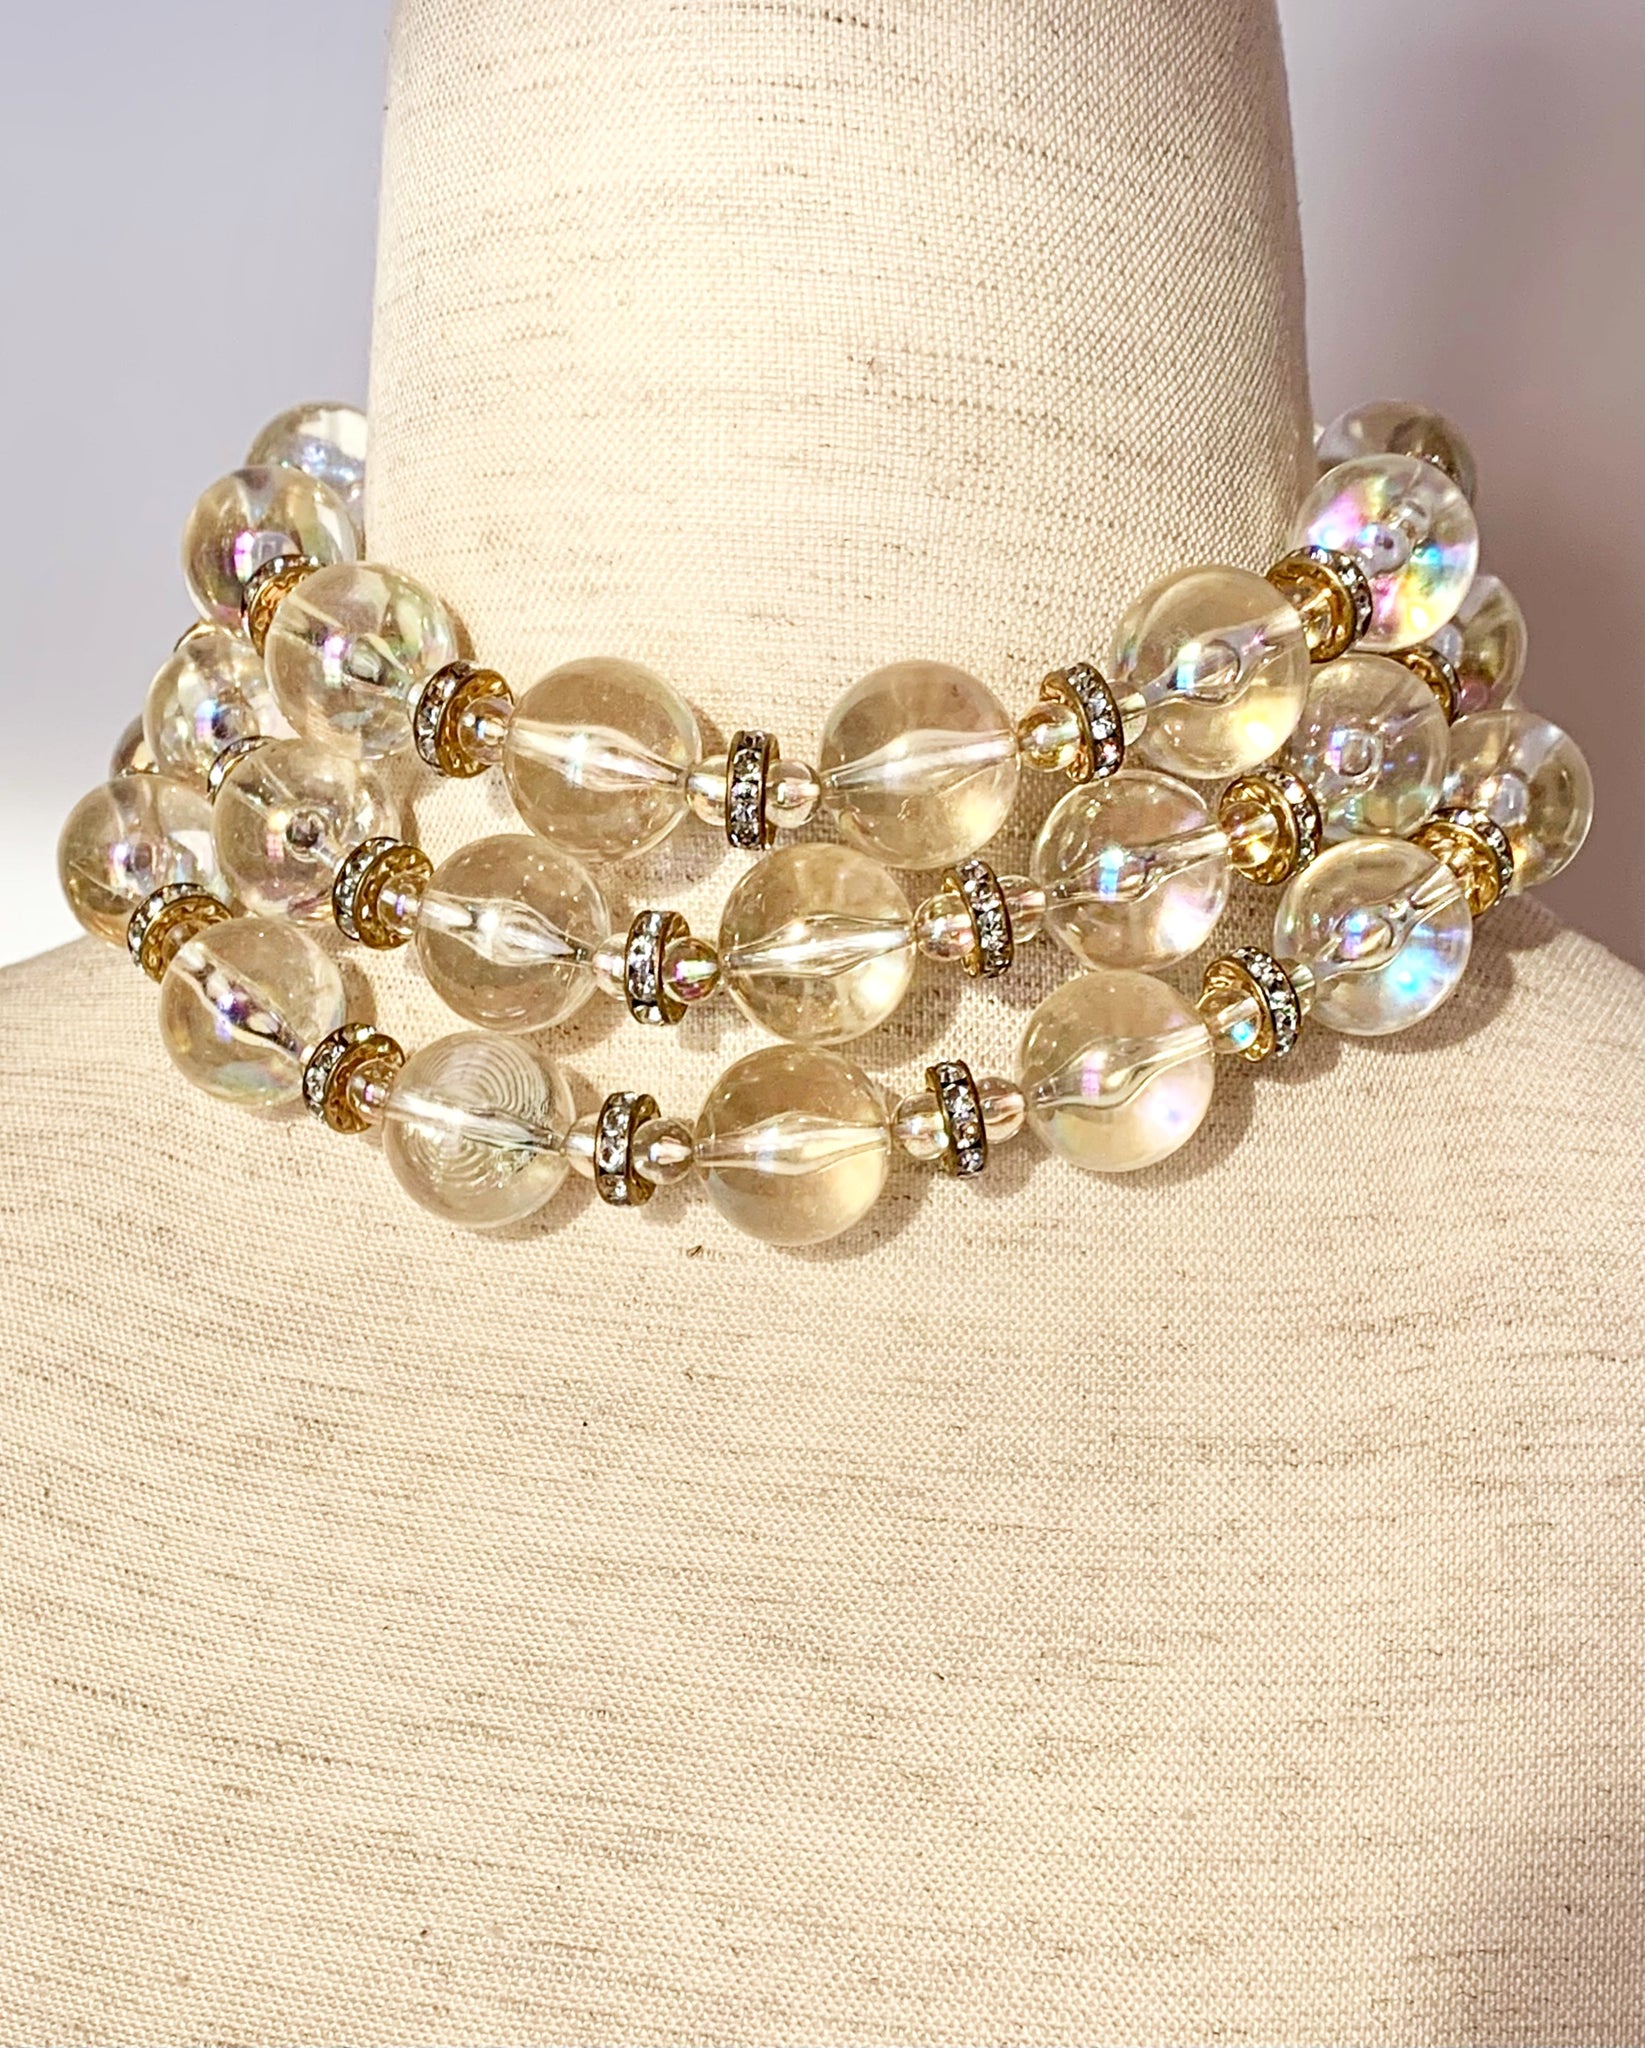 CHANEL VINTAGE HOLOGRAPHIC CRYSTAL RESIN BEAD RUNWAY NECKLACE